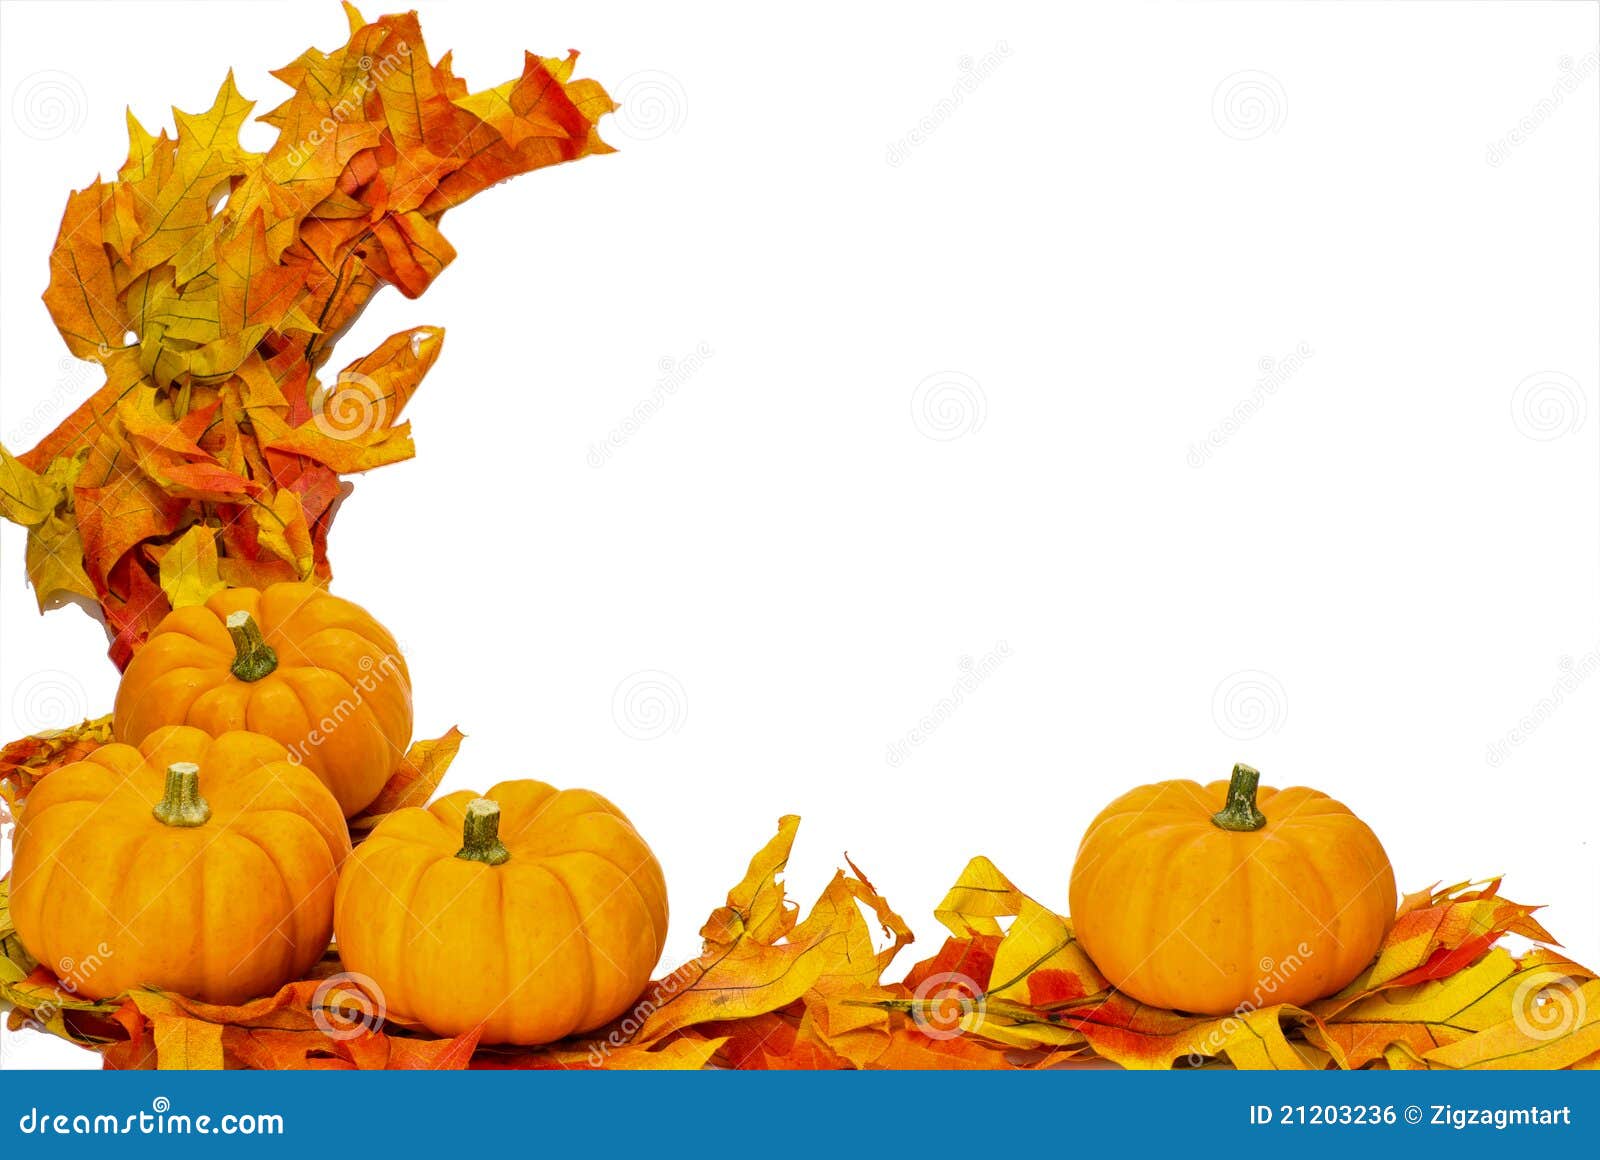 fall decorations clipart - photo #50